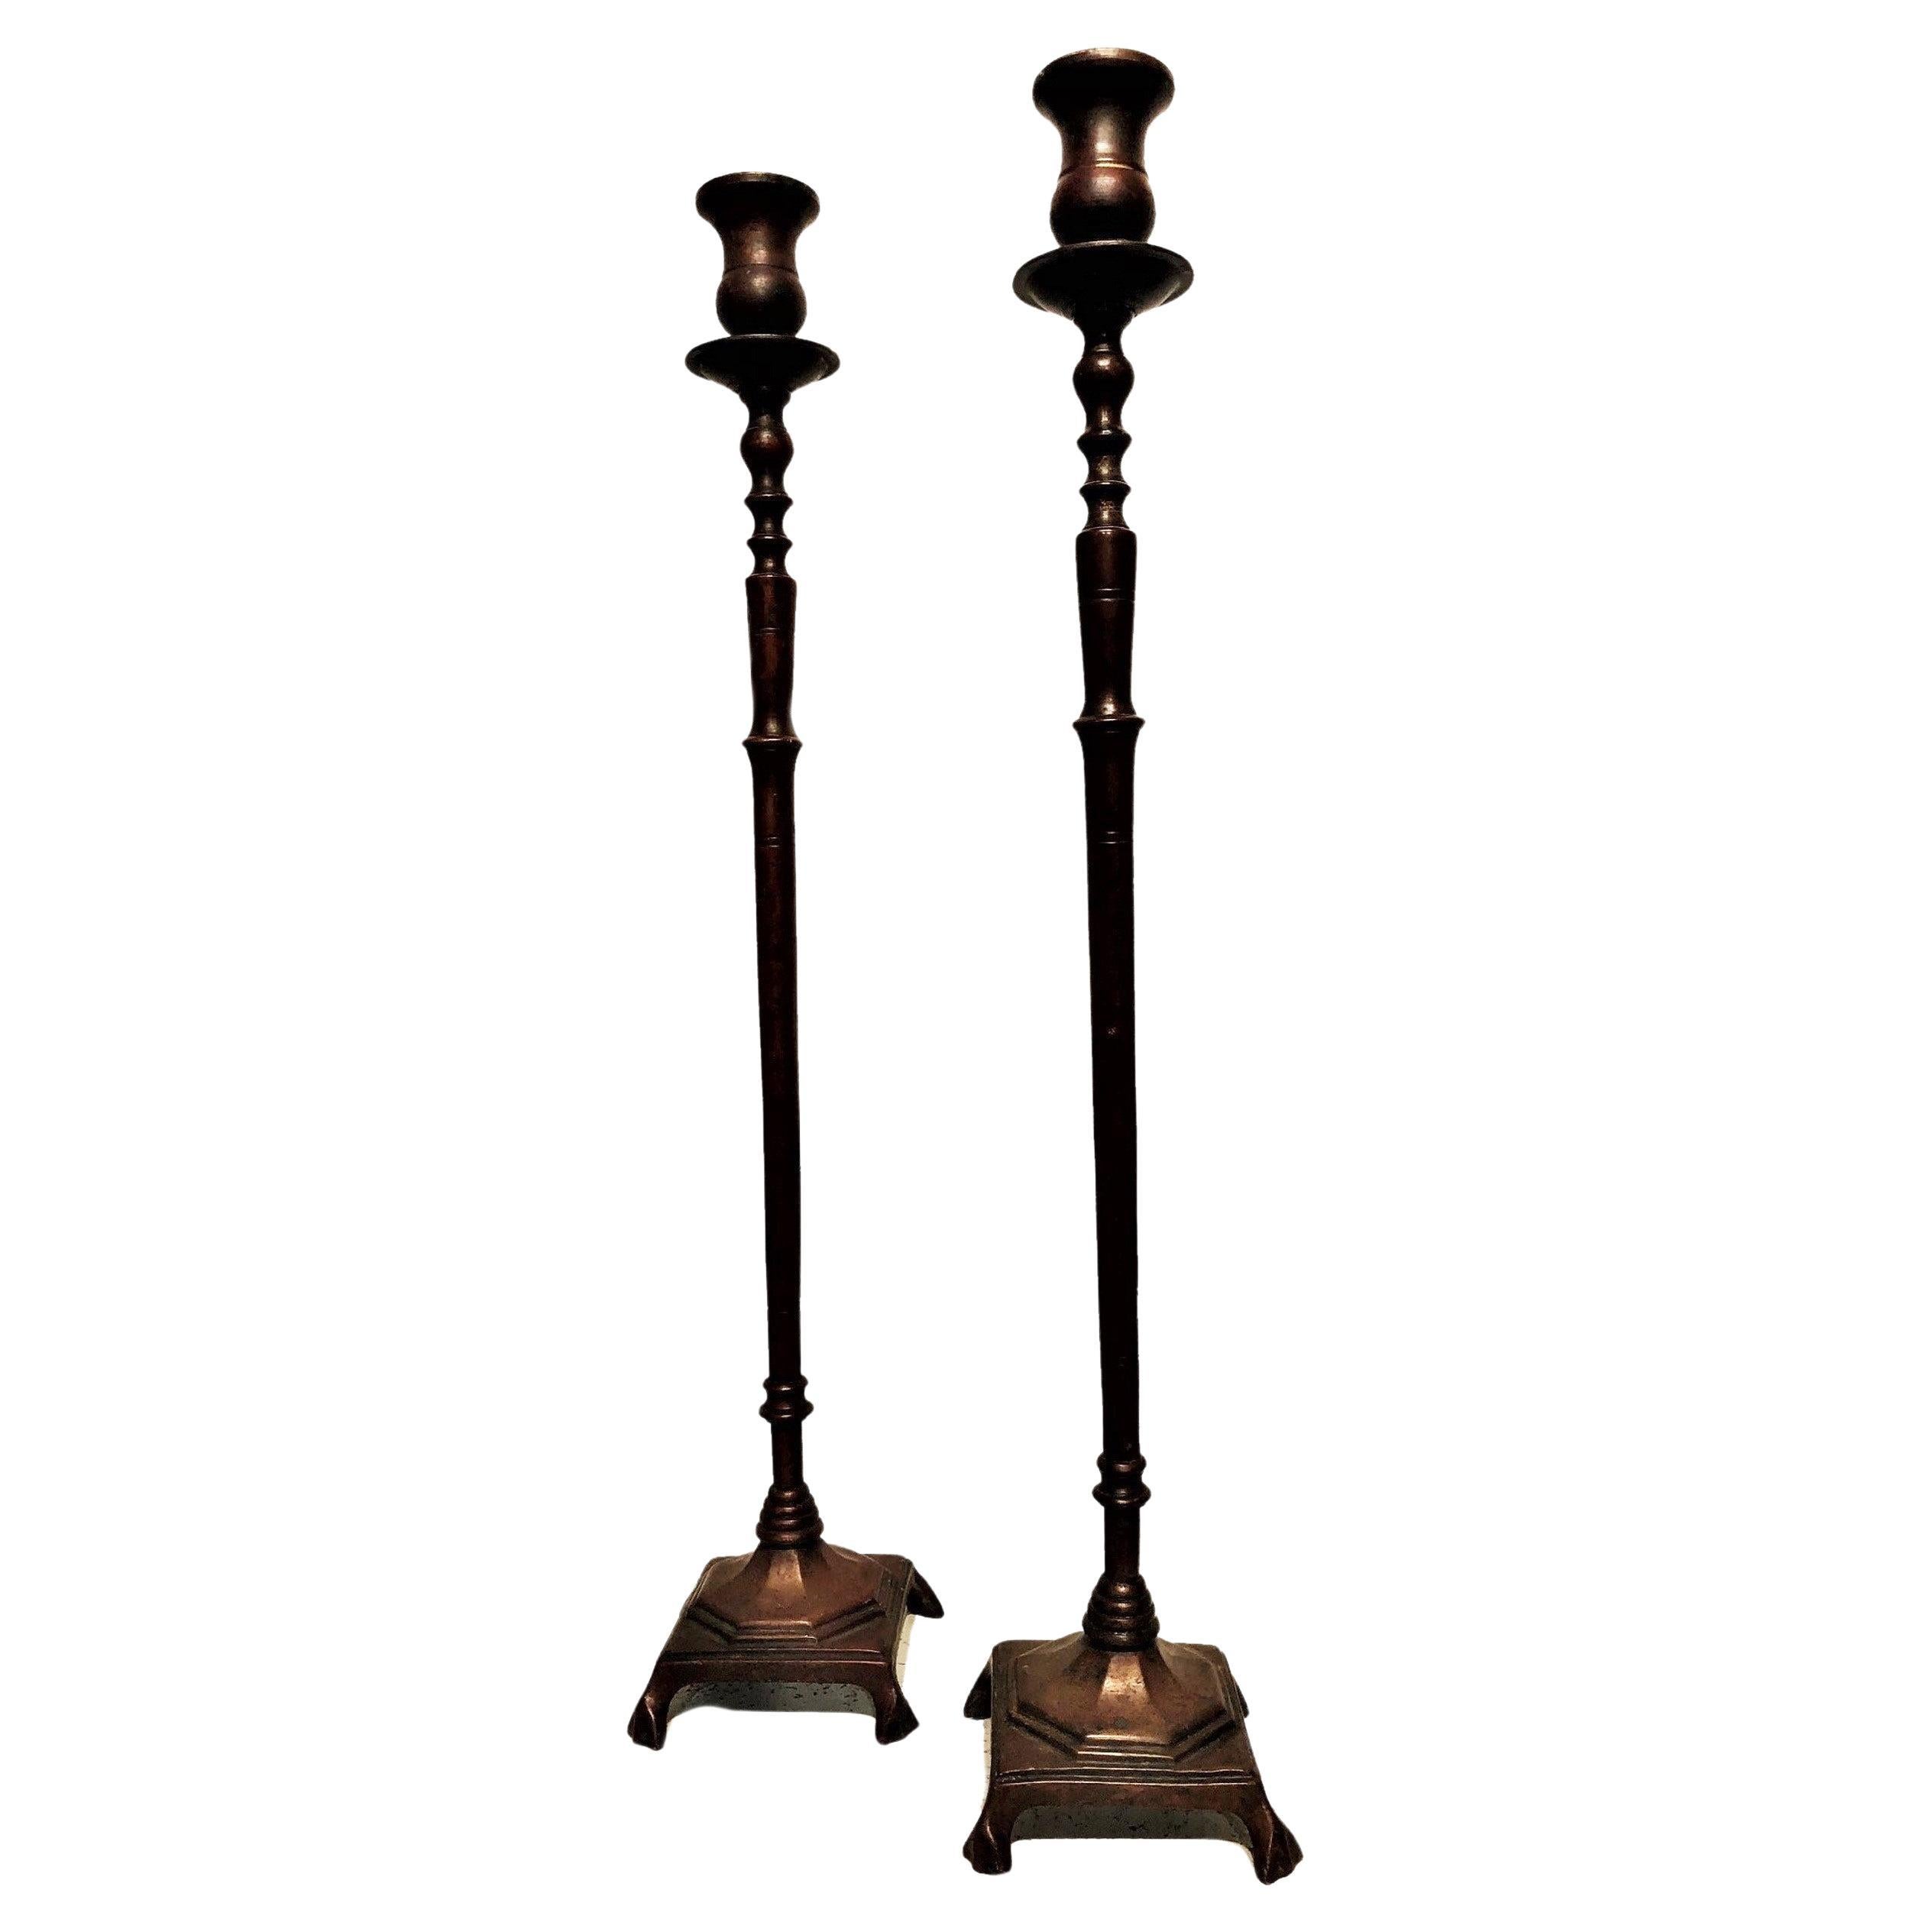 Aesthetic Movement Pair of Bronze Candlesticks in Manner of Tiffany, ca. 1880s For Sale